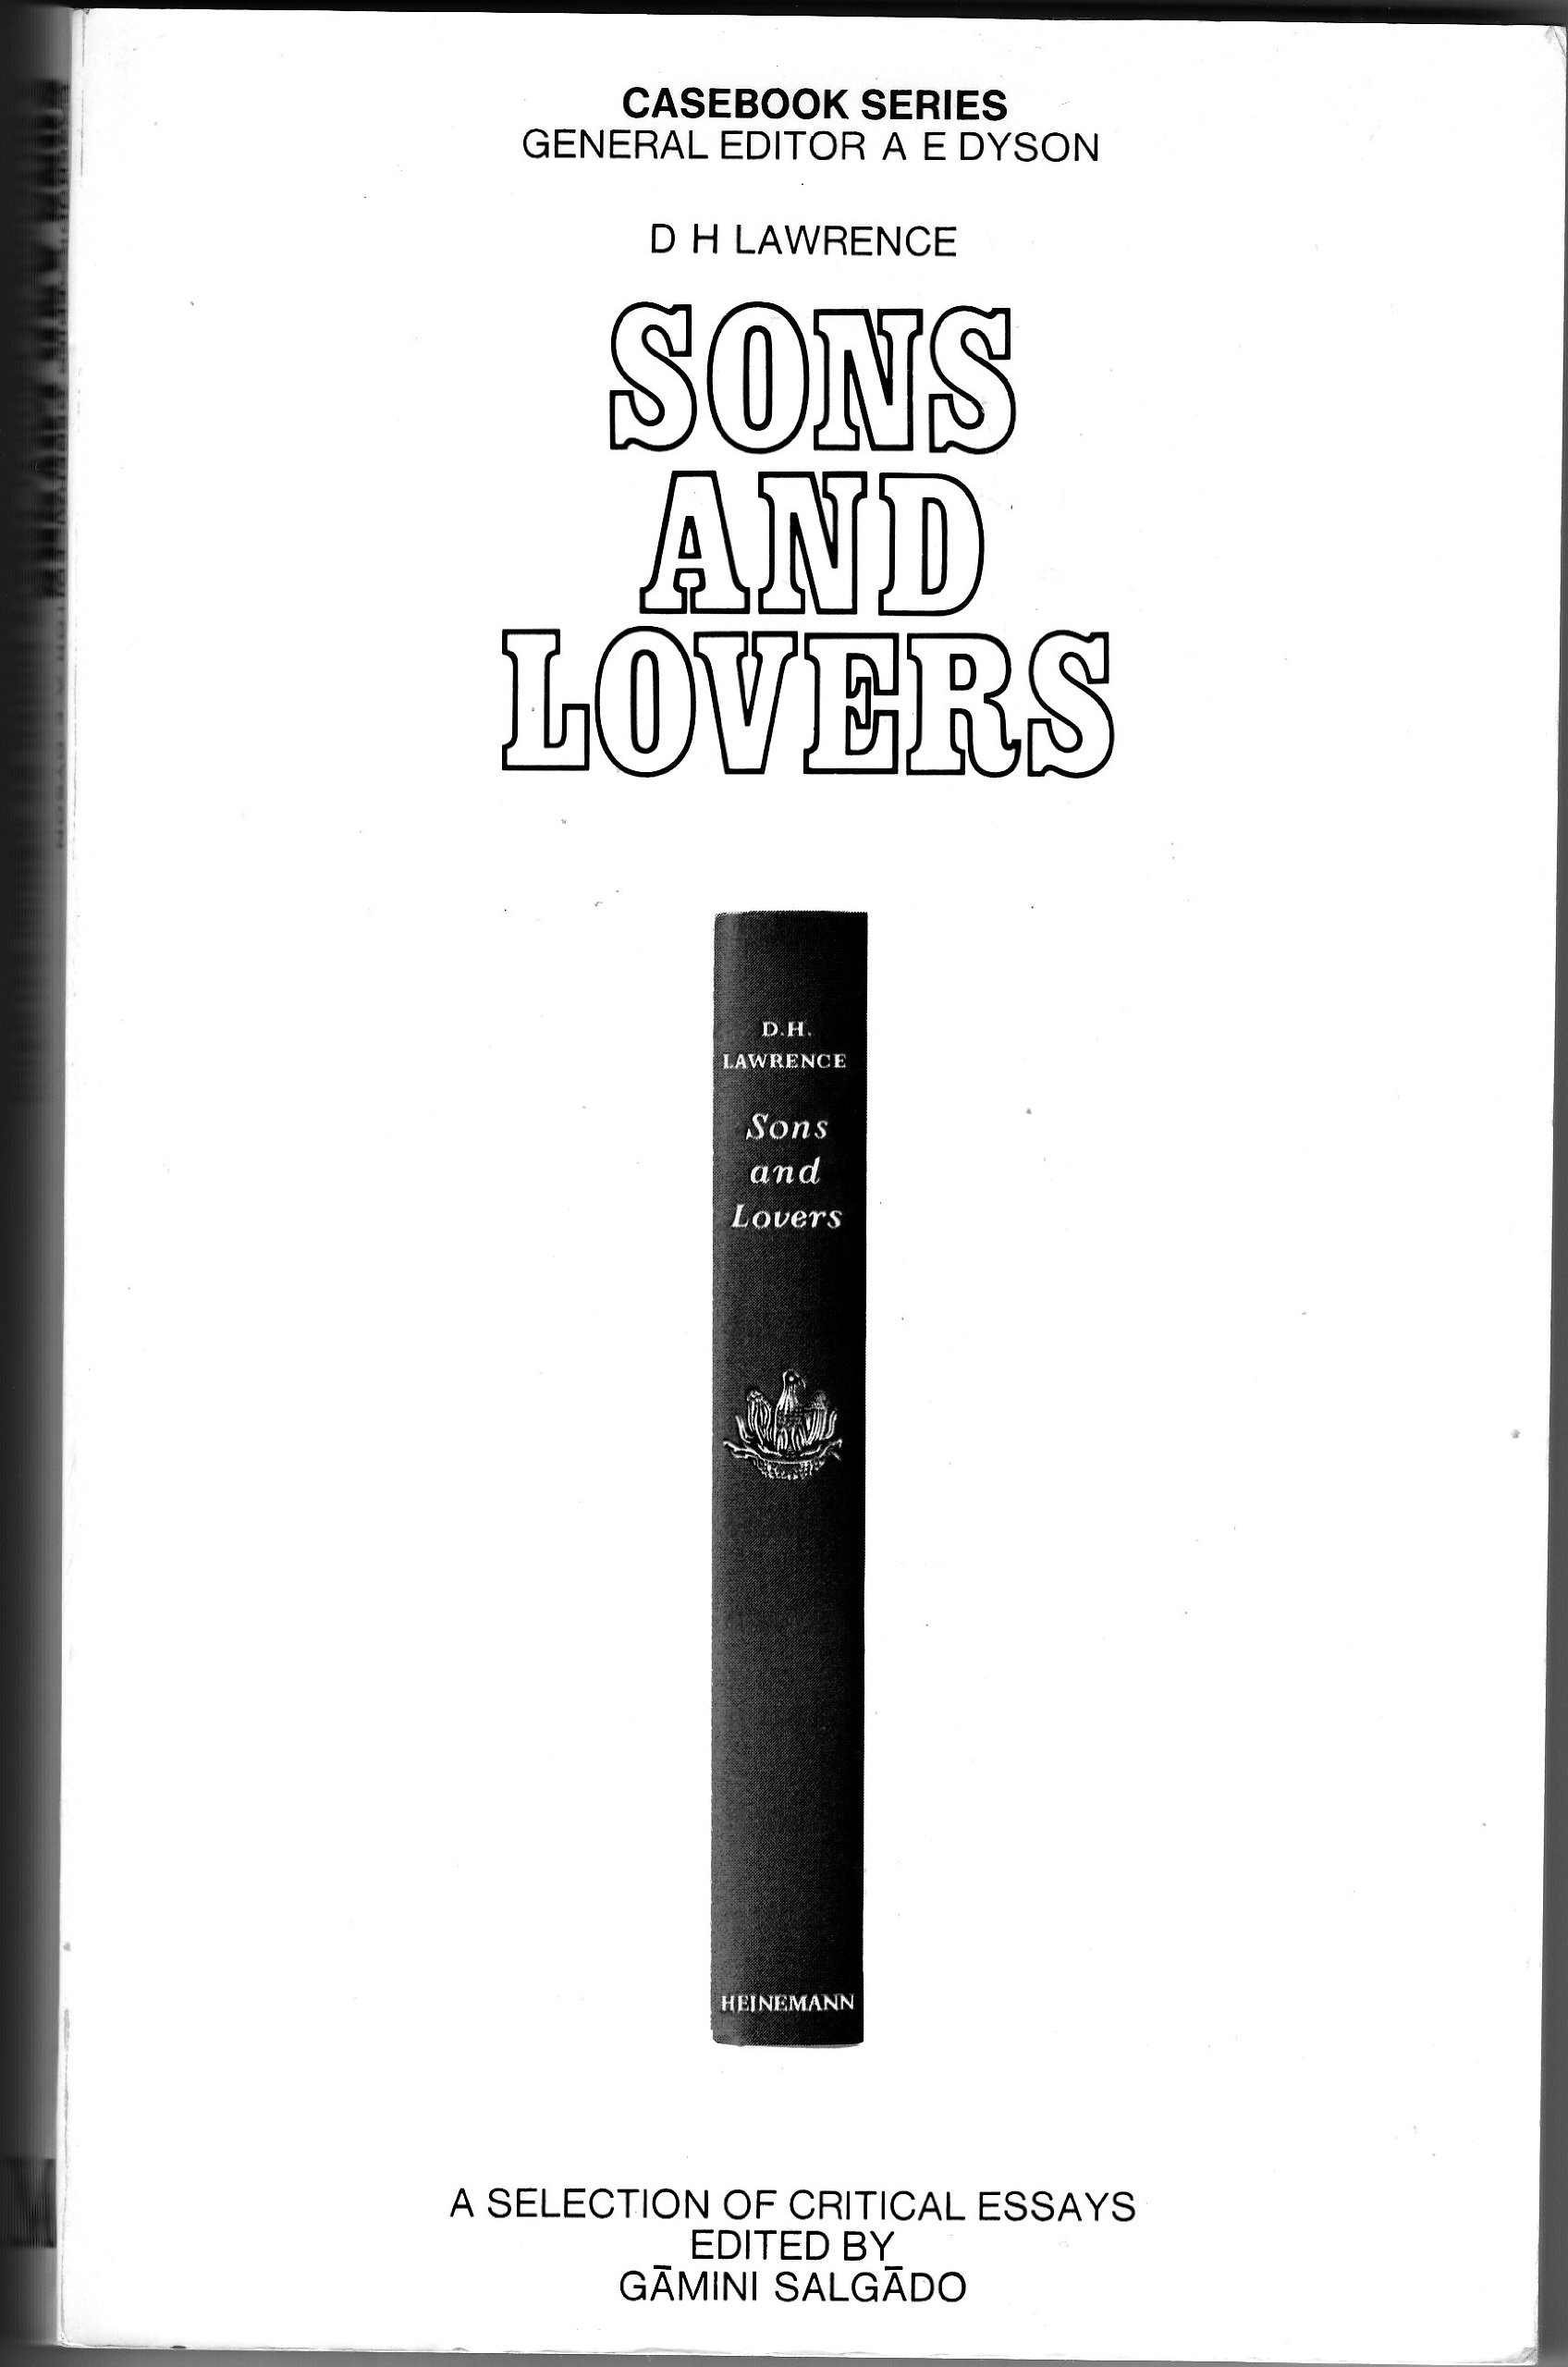 D.H. LAWRENCE, SONS AND LOVERS: A CASEBOOK